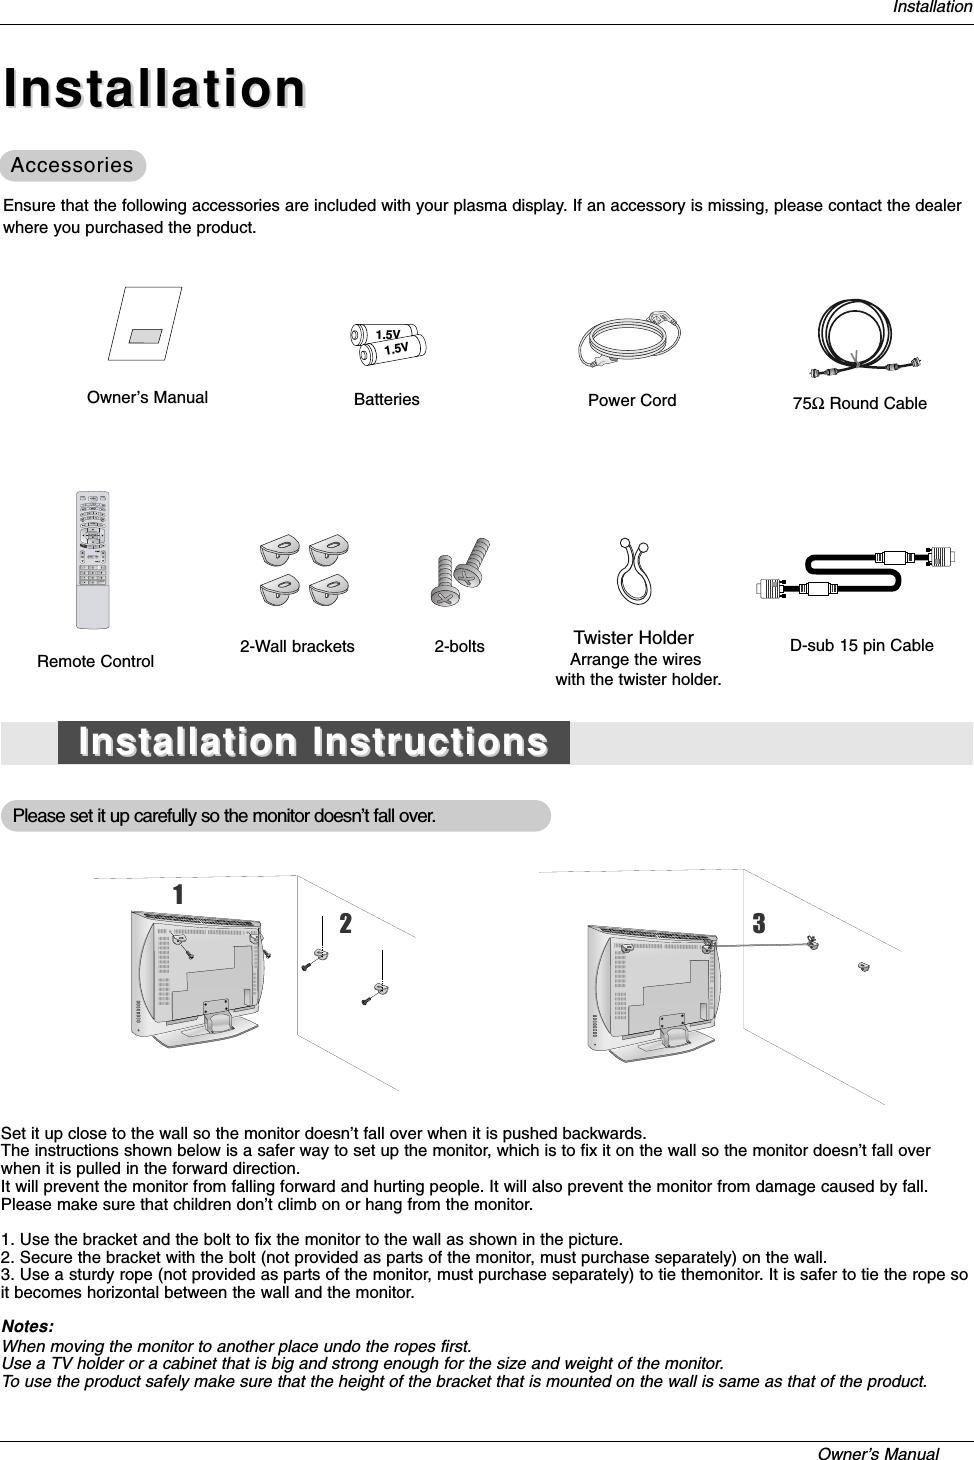 Owner’s Manual   InstallationOwner’s Manual1.5V1.5VBatteries Power CordMODEDAY -DAY +FLASHBKTIMERTV INPUT TV/VIDEOEXITGUIDECC75ΩRound CableEnsure that the following accessories are included with your plasma display. If an accessory is missing, please contact the dealerwhere you purchased the product.2-Wall brackets 2-boltsRemote ControlPlease set it up carefully so the monitor doesn’t fall over.Set it up close to the wall so the monitor doesn’t fall over when it is pushed backwards.The instructions shown below is a safer way to set up the monitor, which is to fix it on the wall so the monitor doesn’t fall overwhen it is pulled in the forward direction. It will prevent the monitor from falling forward and hurting people. It will also prevent the monitor from damage caused by fall.Please make sure that children don’t climb on or hang from the monitor.1. Use the bracket and the bolt to fix the monitor to the wall as shown in the picture.2. Secure the bracket with the bolt (not provided as parts of the monitor, must purchase separately) on the wall.3. Use a sturdy rope (not provided as parts of the monitor, must purchase separately) to tie themonitor. It is safer to tie the rope soit becomes horizontal between the wall and the monitor.Notes:When moving the monitor to another place undo the ropes first.Use a TV holder or a cabinet that is big and strong enough for the size and weight of the monitor.To use the product safely make sure that the height of the bracket that is mounted on the wall is same as that of the product.InstallationInstallationInstallation InstructionsInstallation InstructionsAccessoriesAccessoriesD-sub 15 pin CableTwister HolderArrange the wires with the twister holder.123